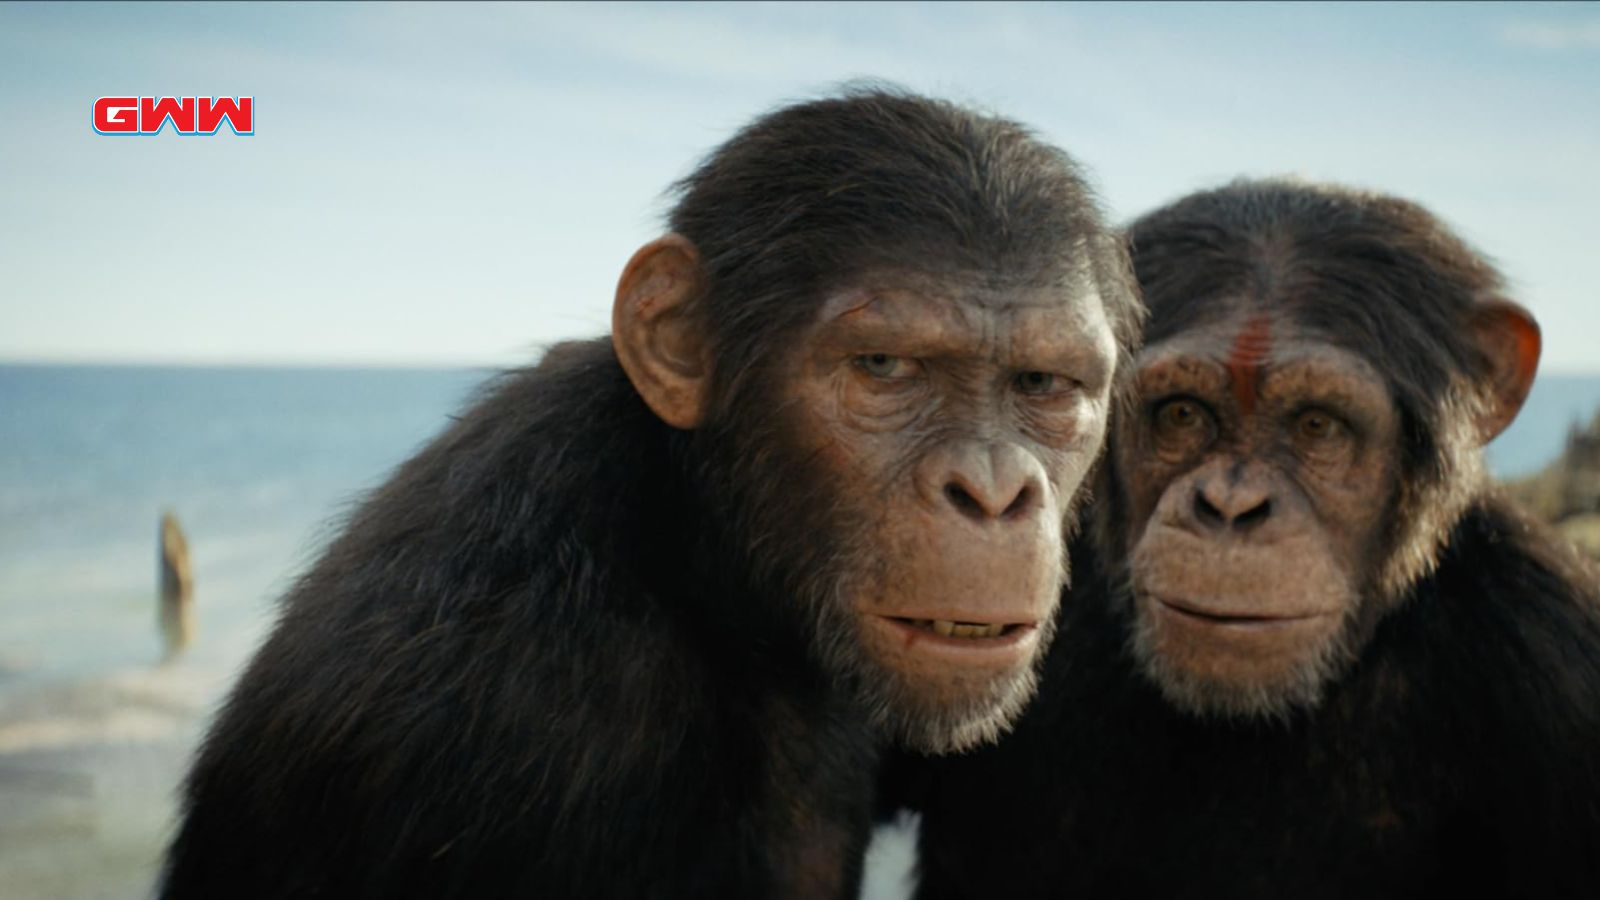 Sara Wiseman and Owen Teague as Cast of Kingdom of the Planet of the Apes